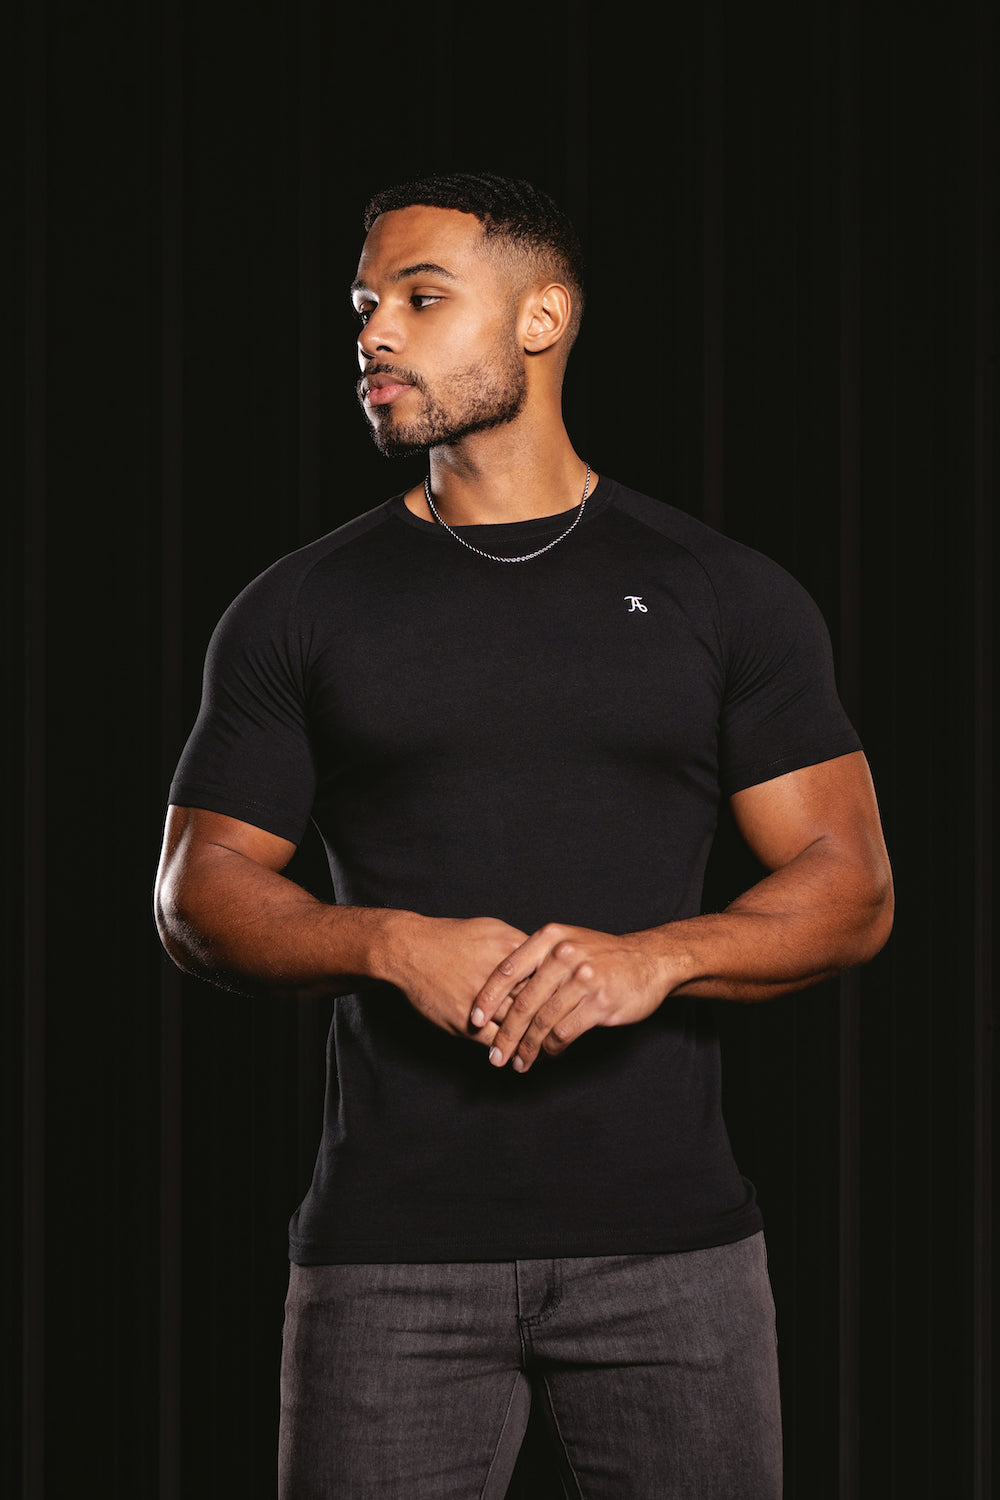 Athletic Fit T-Shirt in White - TAILORED ATHLETE - USA